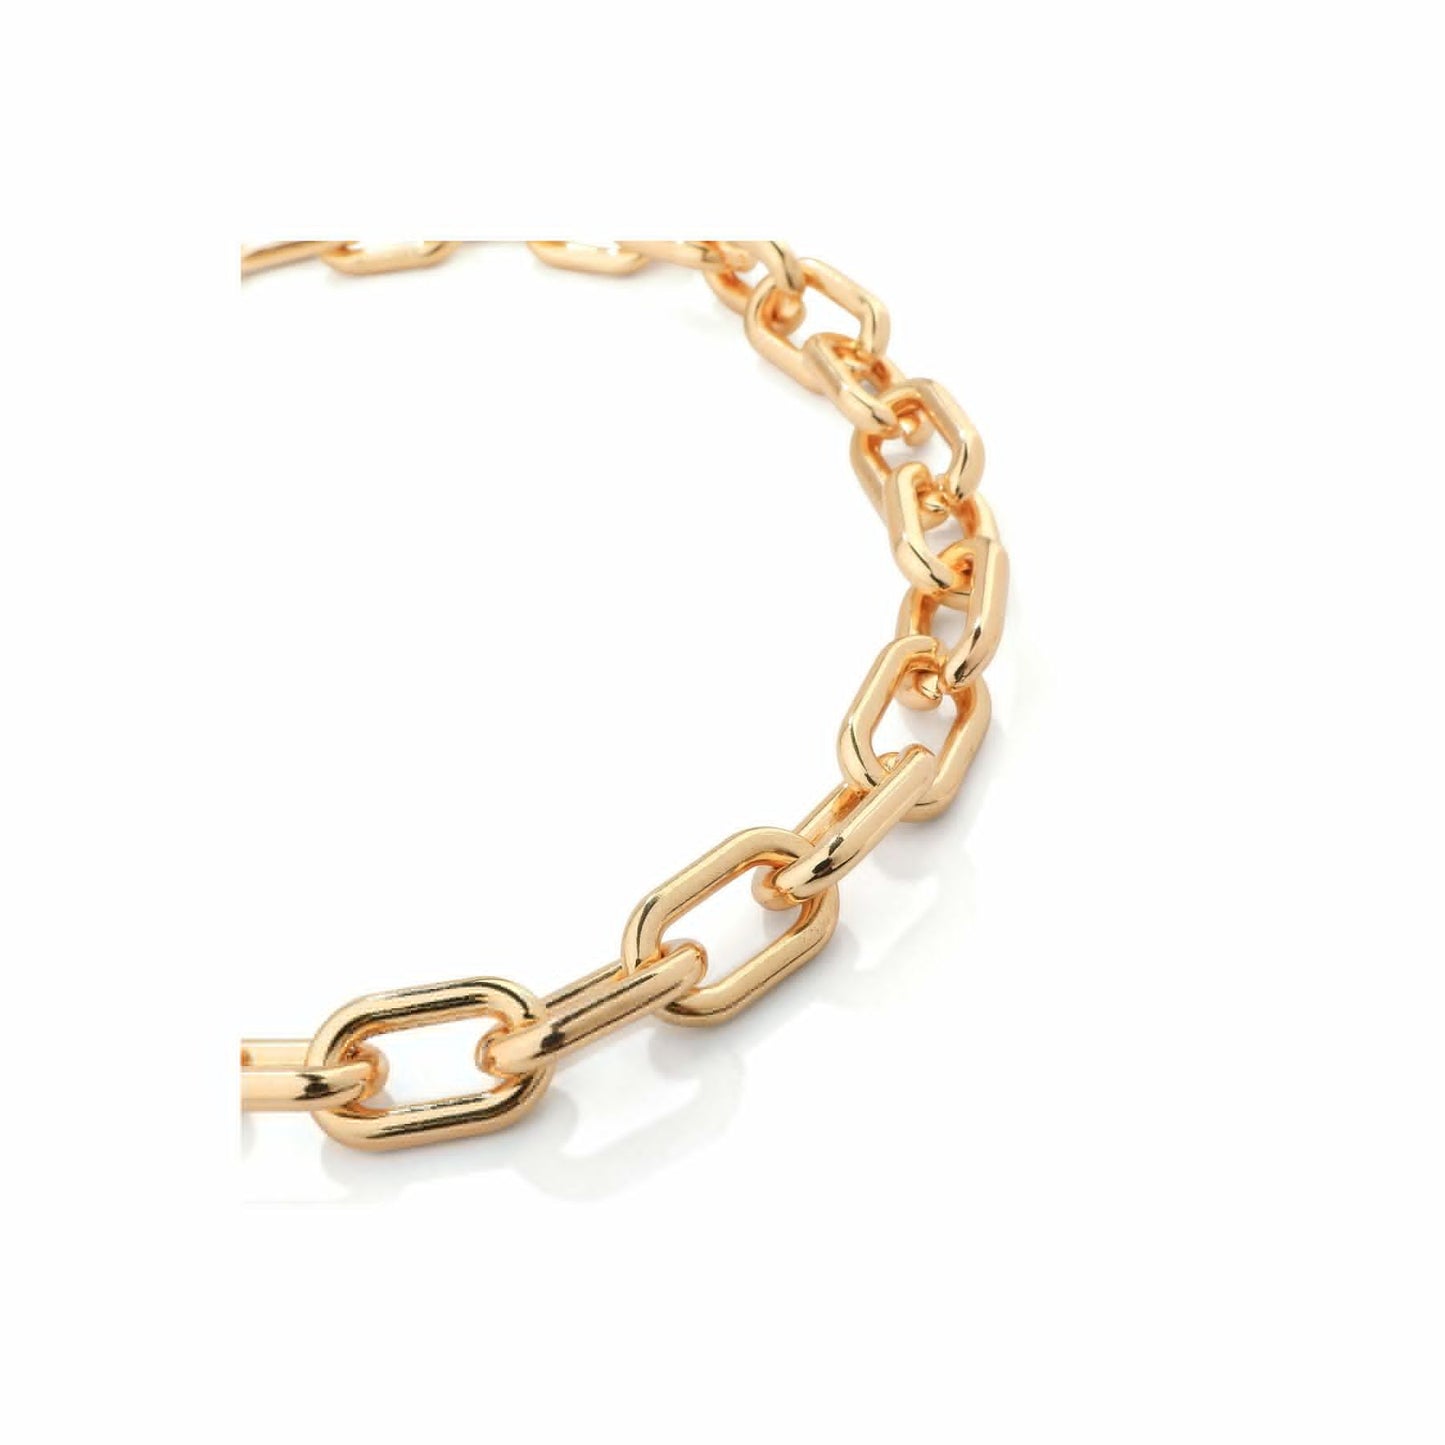 Chocolate - Yellow Gold Chunky Chain Adjustable Length Necklace - from Frinkle